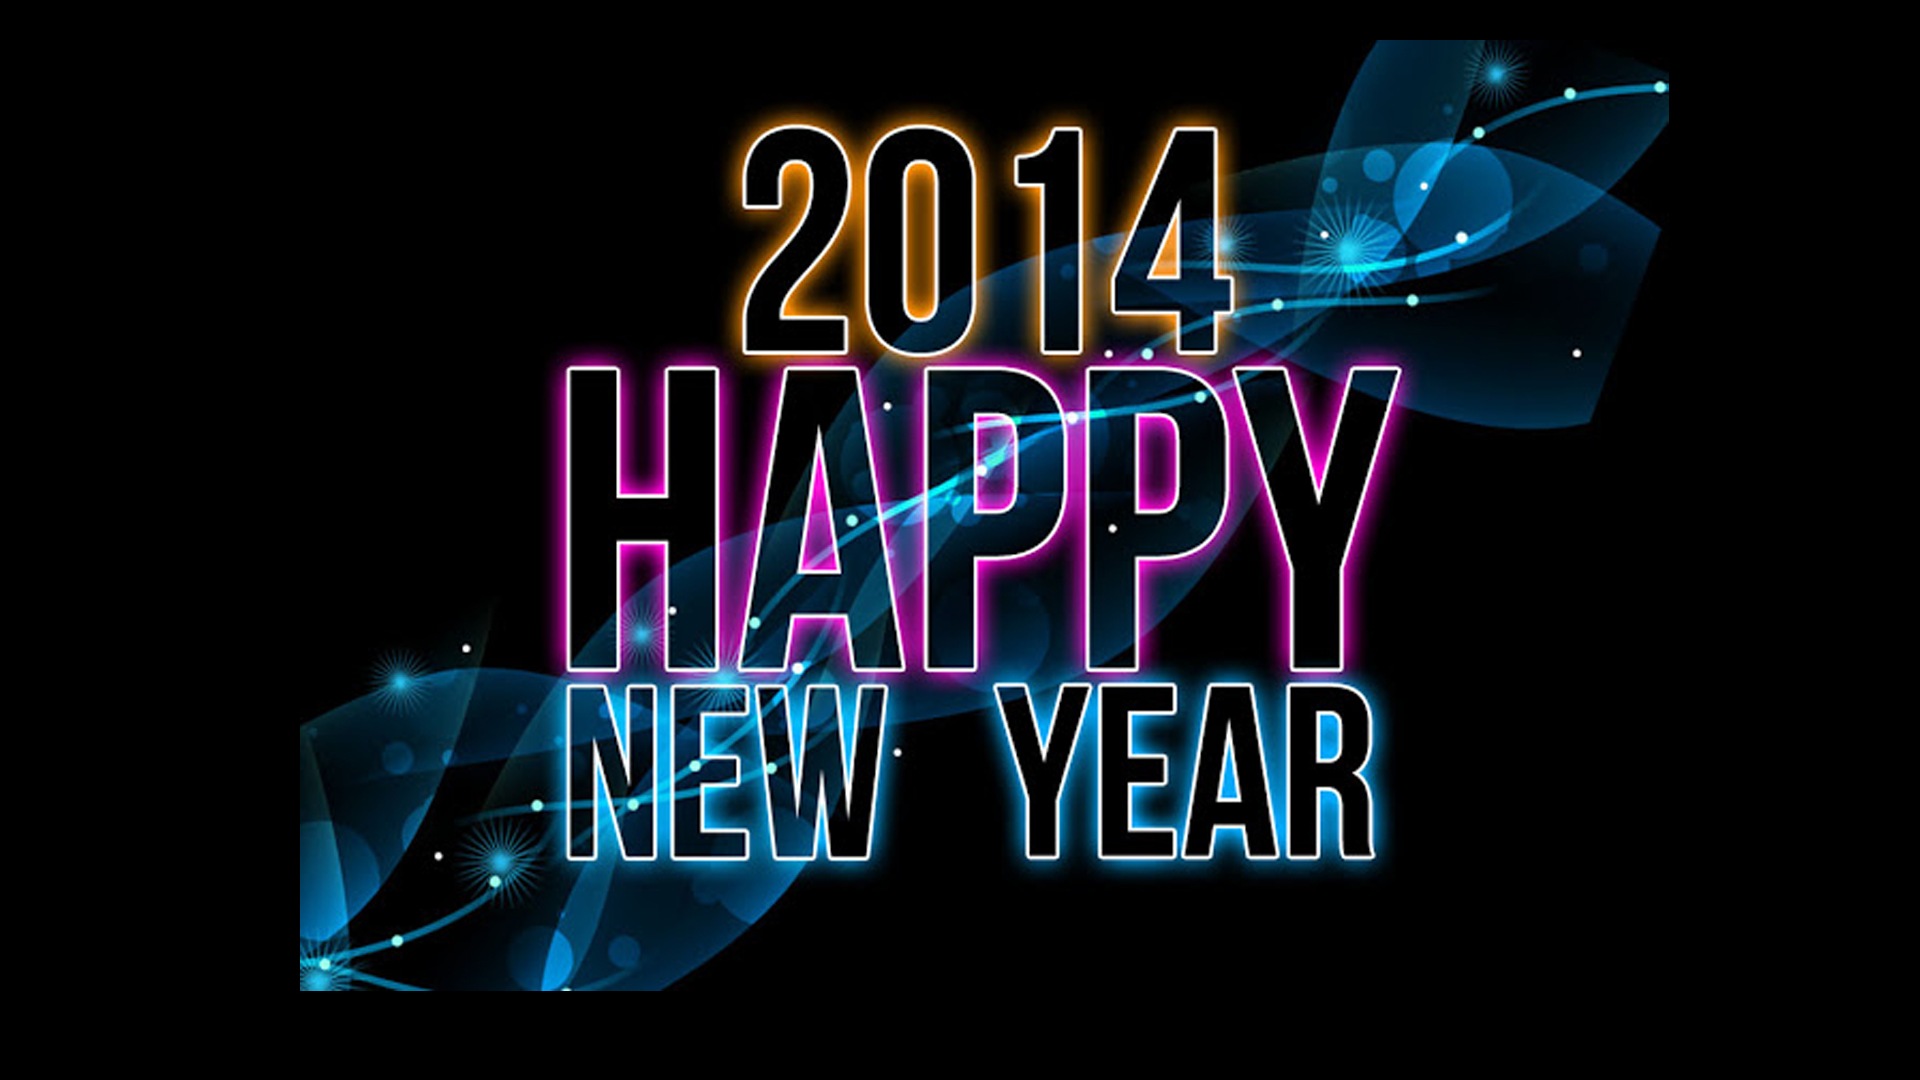 2014 New Year Theme HD Wallpapers (1) #11 - 1920x1080